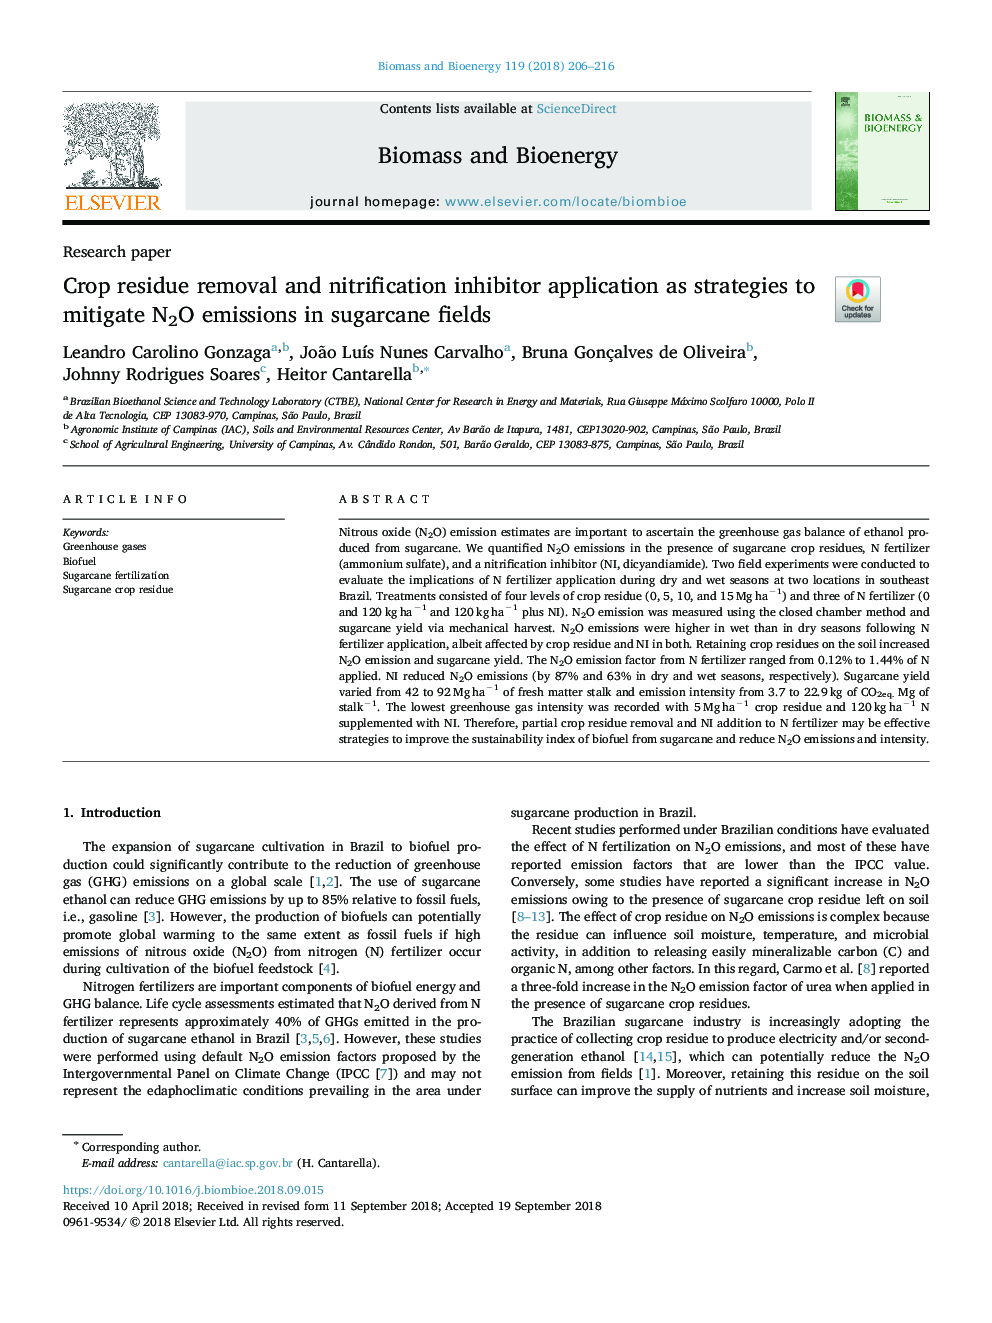 Crop residue removal and nitrification inhibitor application as strategies to mitigate N2O emissions in sugarcane fields